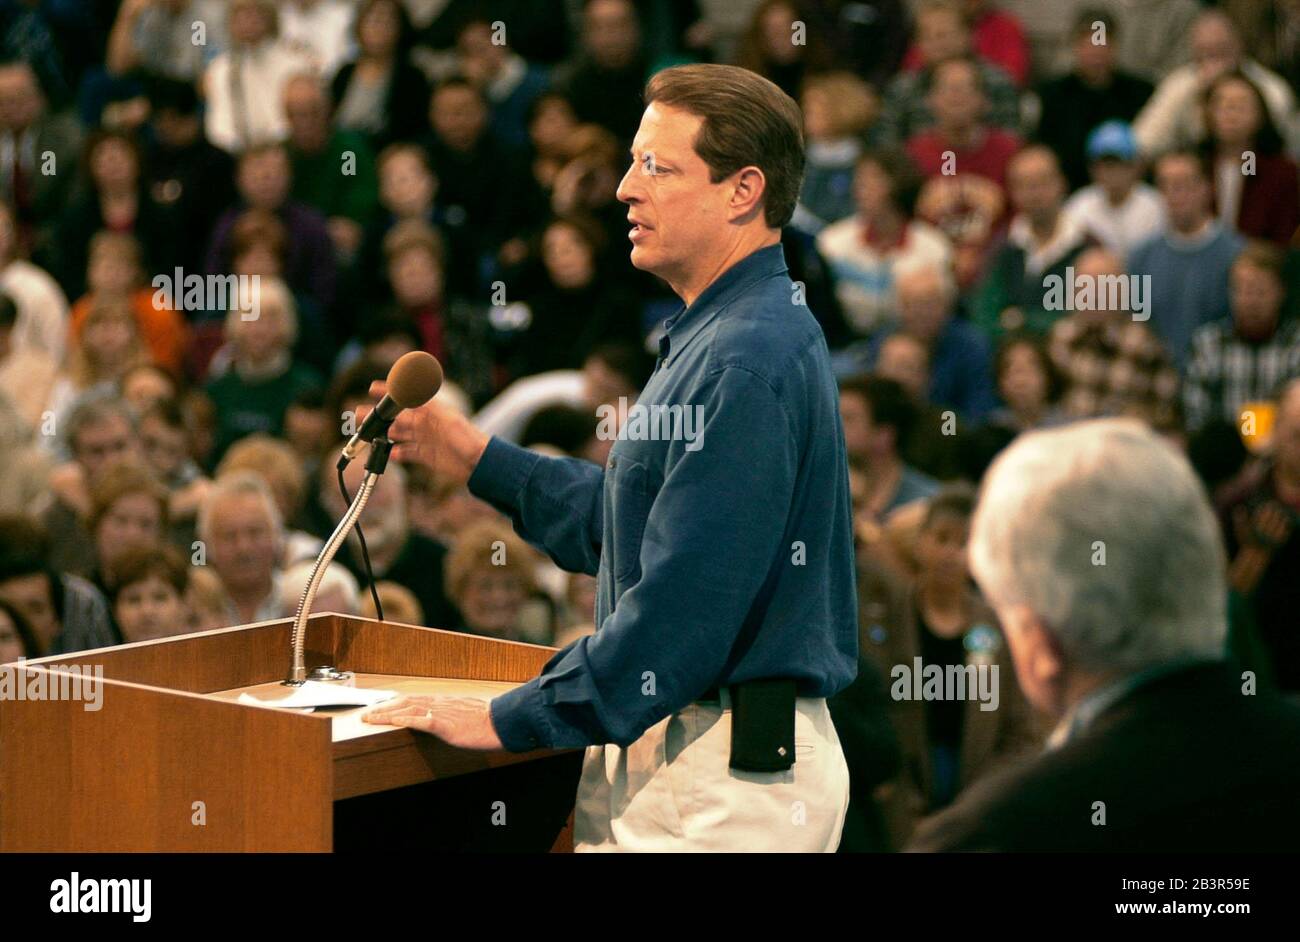 Cedar Falls, Iowa USA, January 22, 2000: Presidential candidate Al Gore talks to a crowd at the University of Northern Iowa while Senator Ted Kennedy watches from stage.  ©Bob Daemmrich Stock Photo